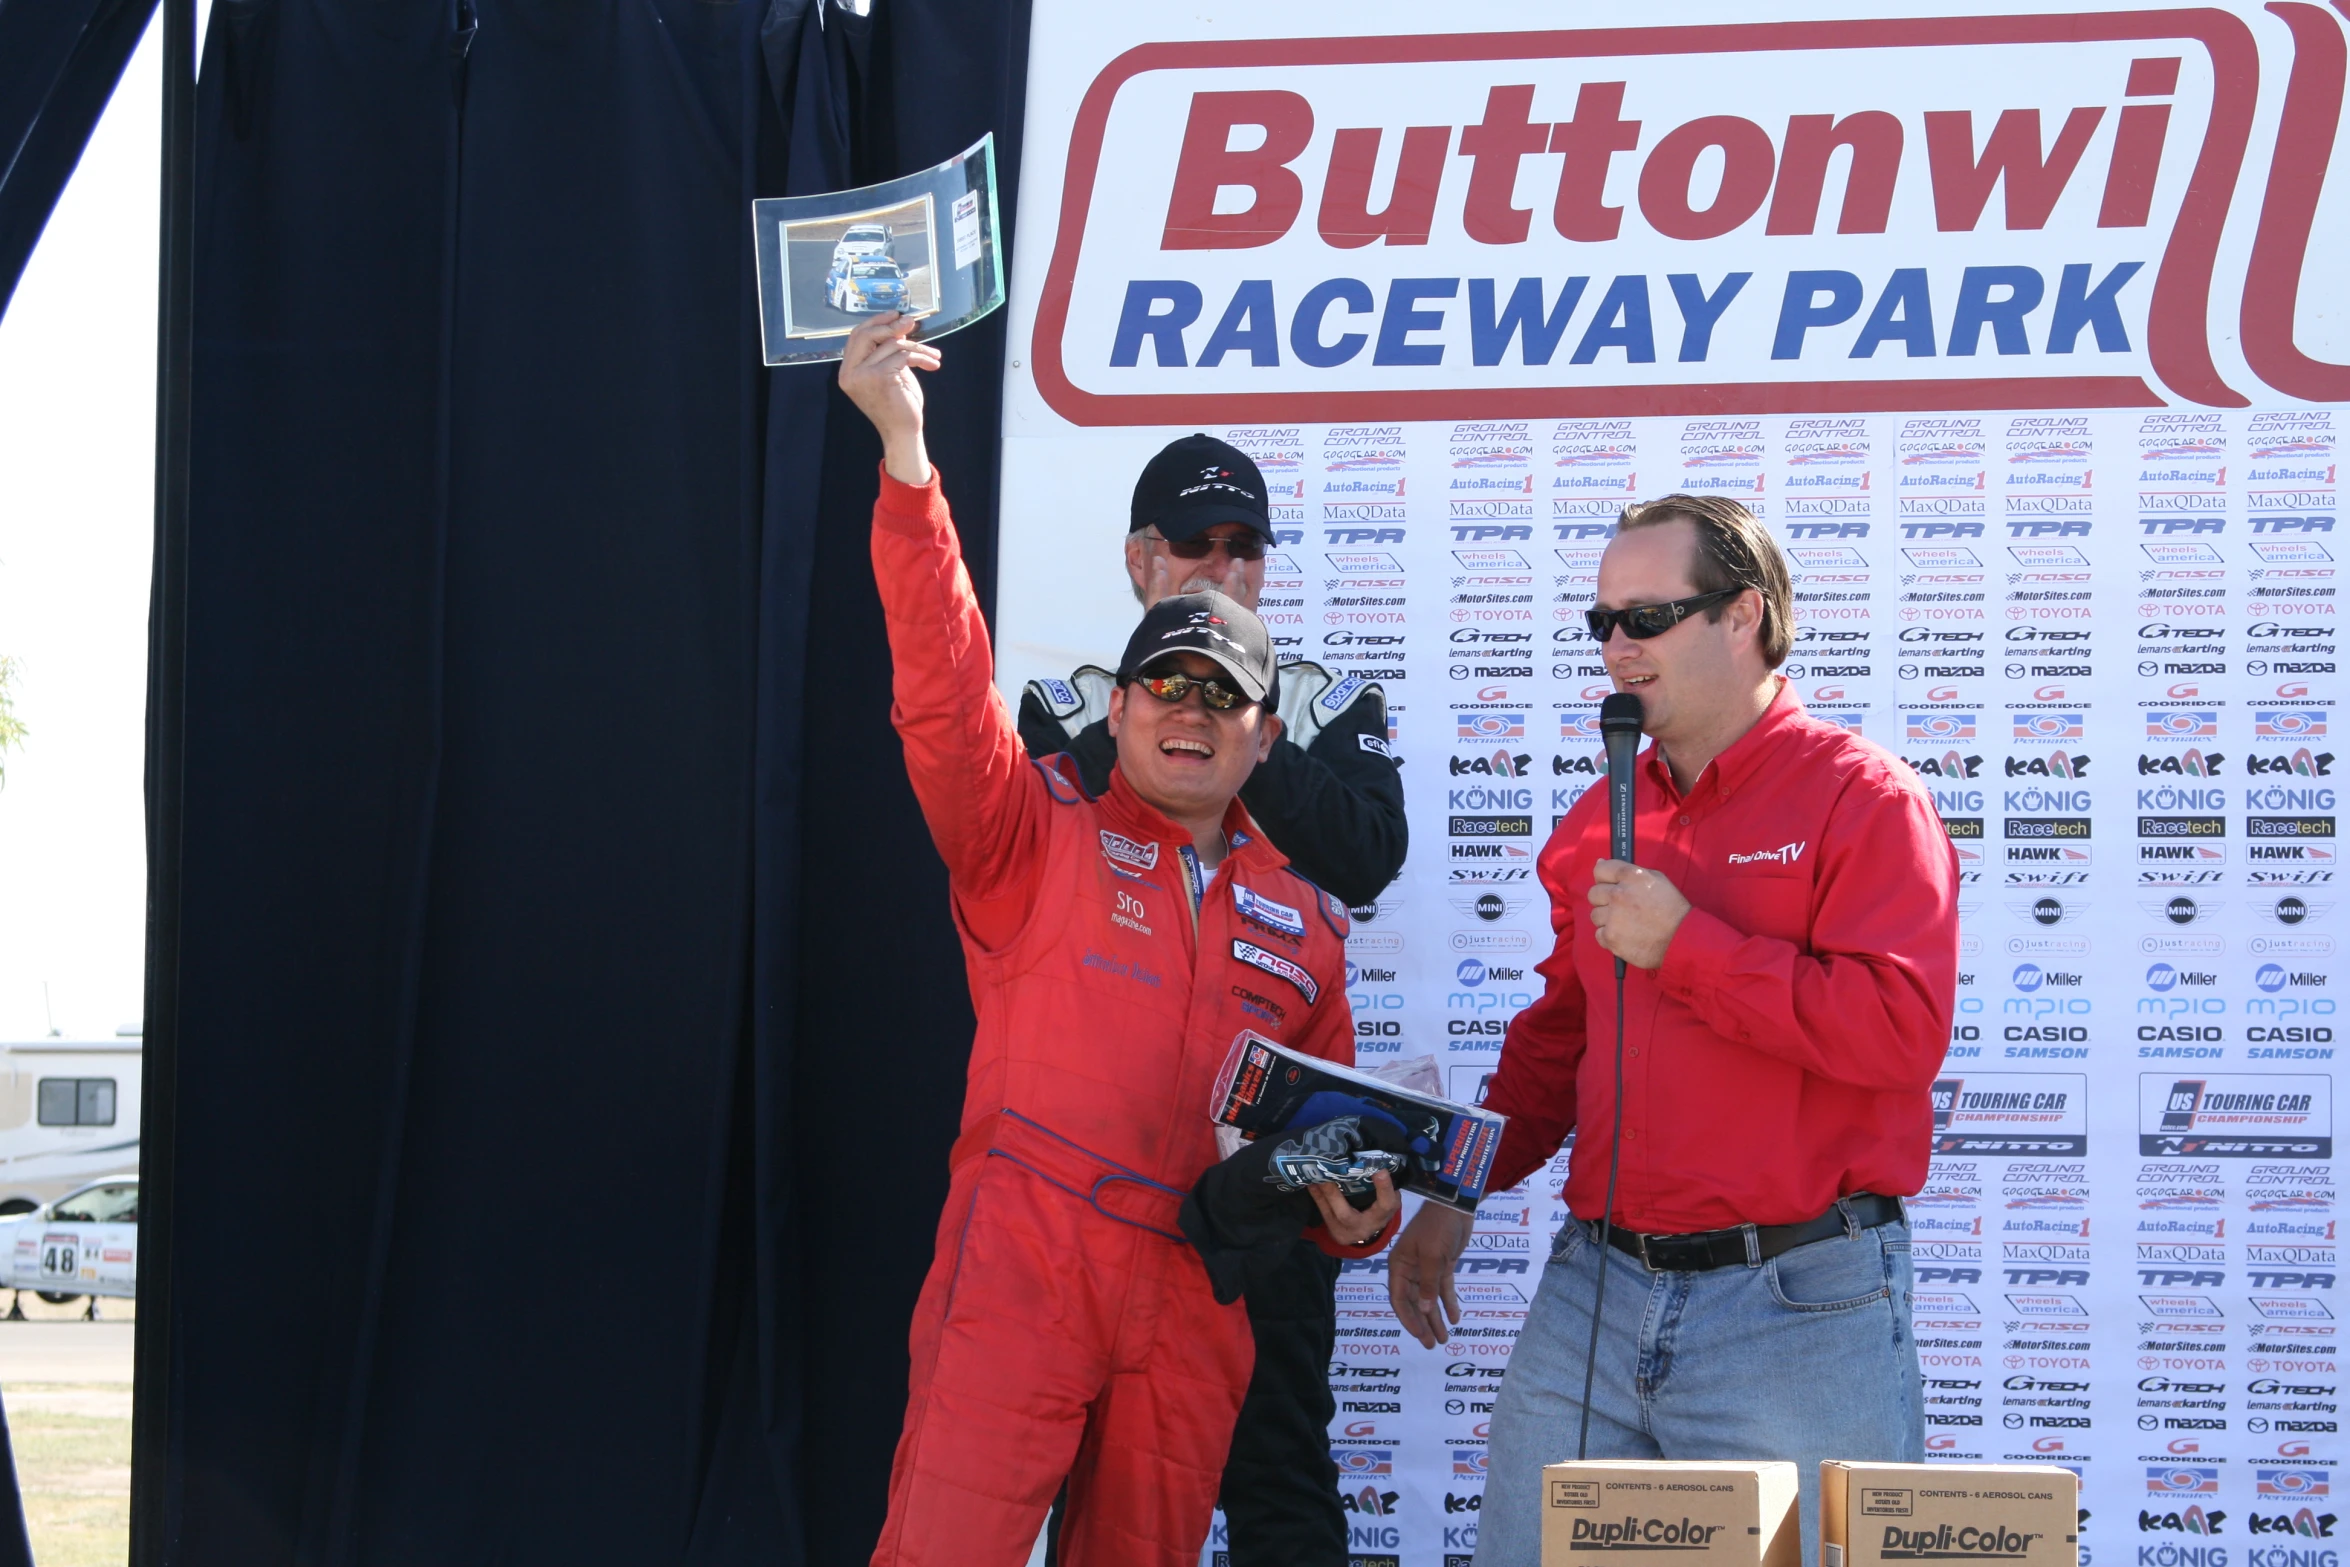 two men in racing gear on stage with a sign